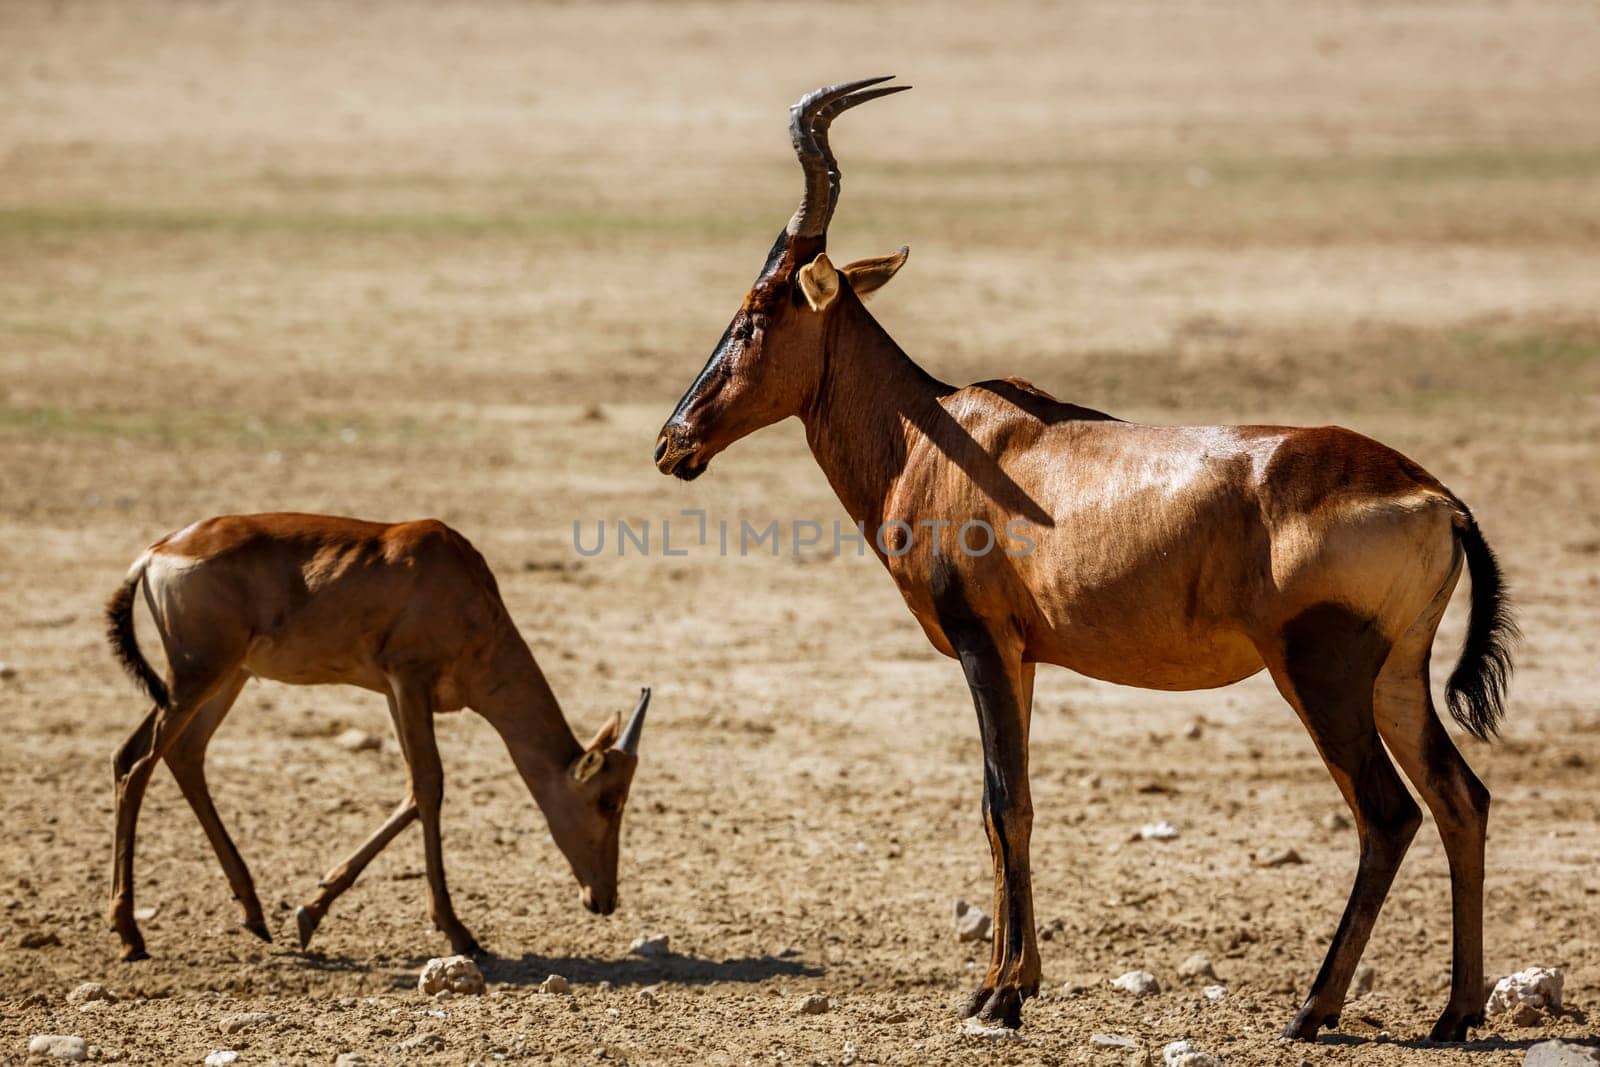 Hartebeest with cut in dry land in Kgalagadi transfrontier park, South Africa; specie Alcelaphus buselaphus family of Bovidae